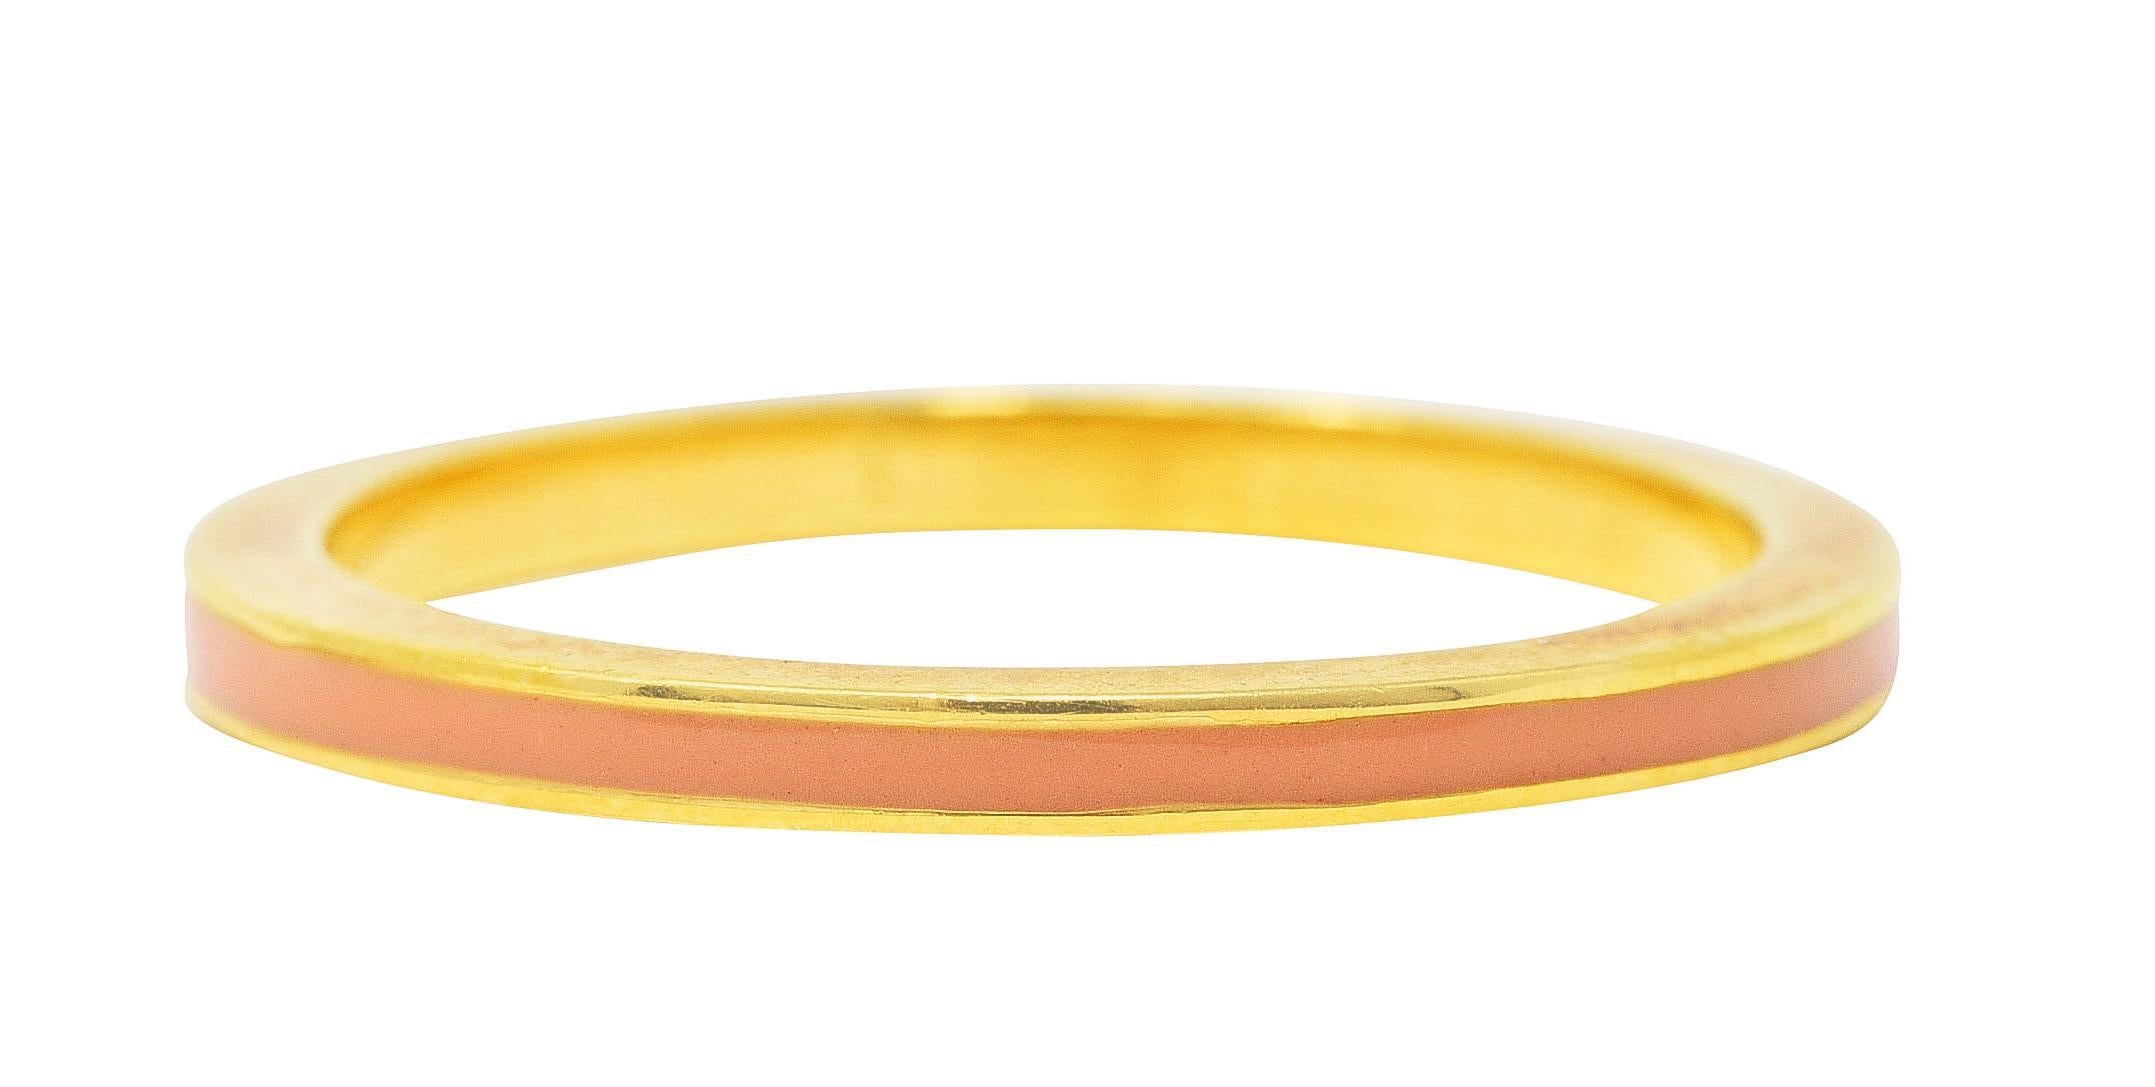 Band ring features a recessed enamel channel fully around
Glossy and opaque light peach in color
With high polished gold surround
Stamped 750 for 18 karat gold
Fully signed with maker's mark for Hidalgo
Circa: 1990's
Ring size: 6 1/2 and not